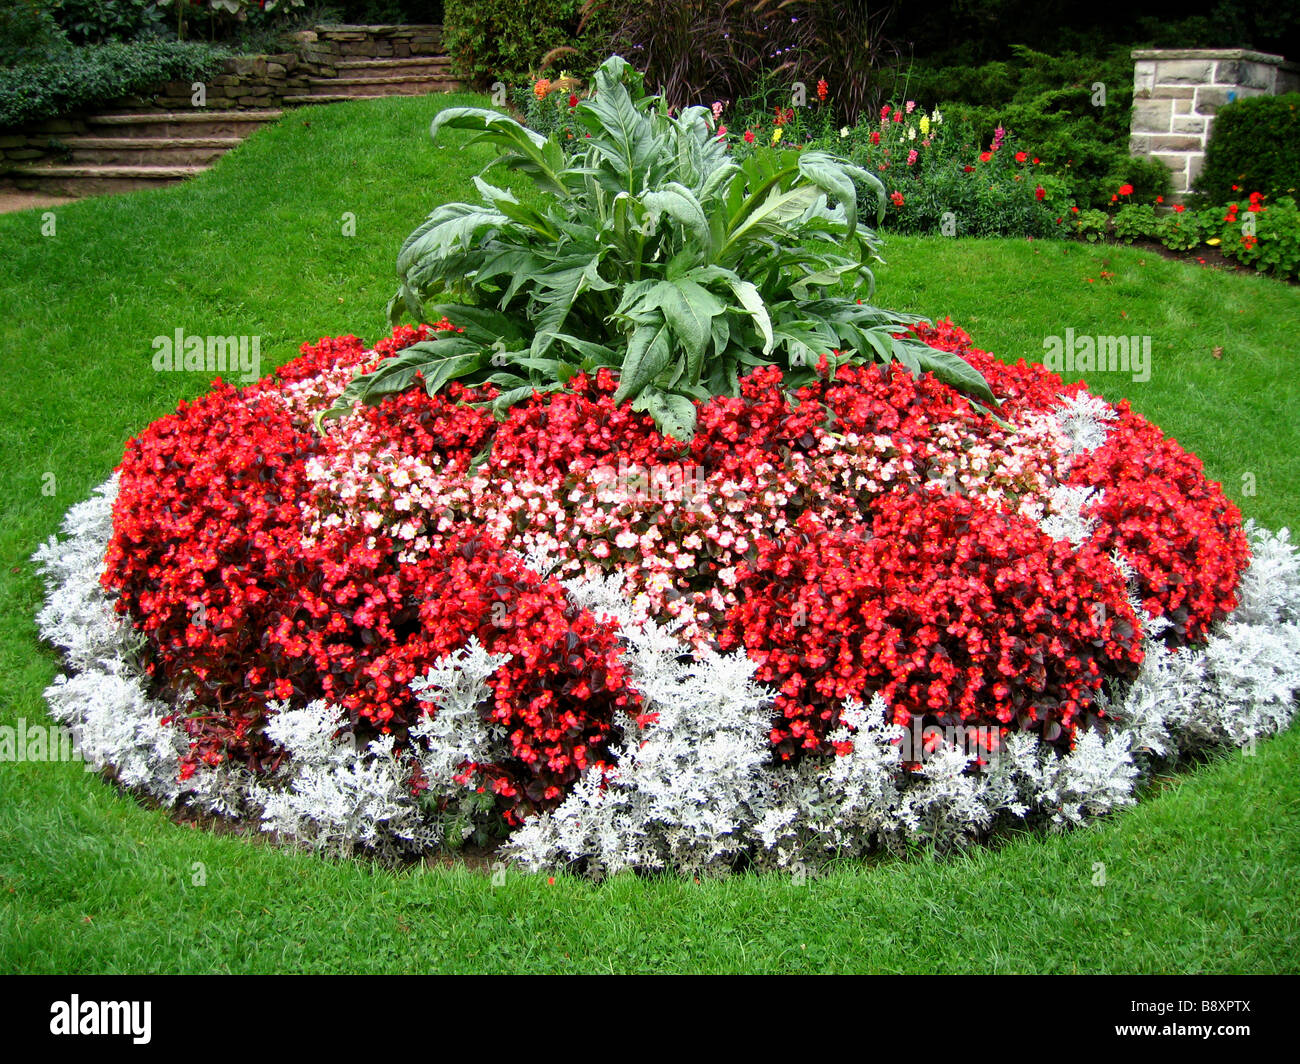 A traditional Victorian style circular flowerbed display with cynara cardunculus in the center Stock Photo